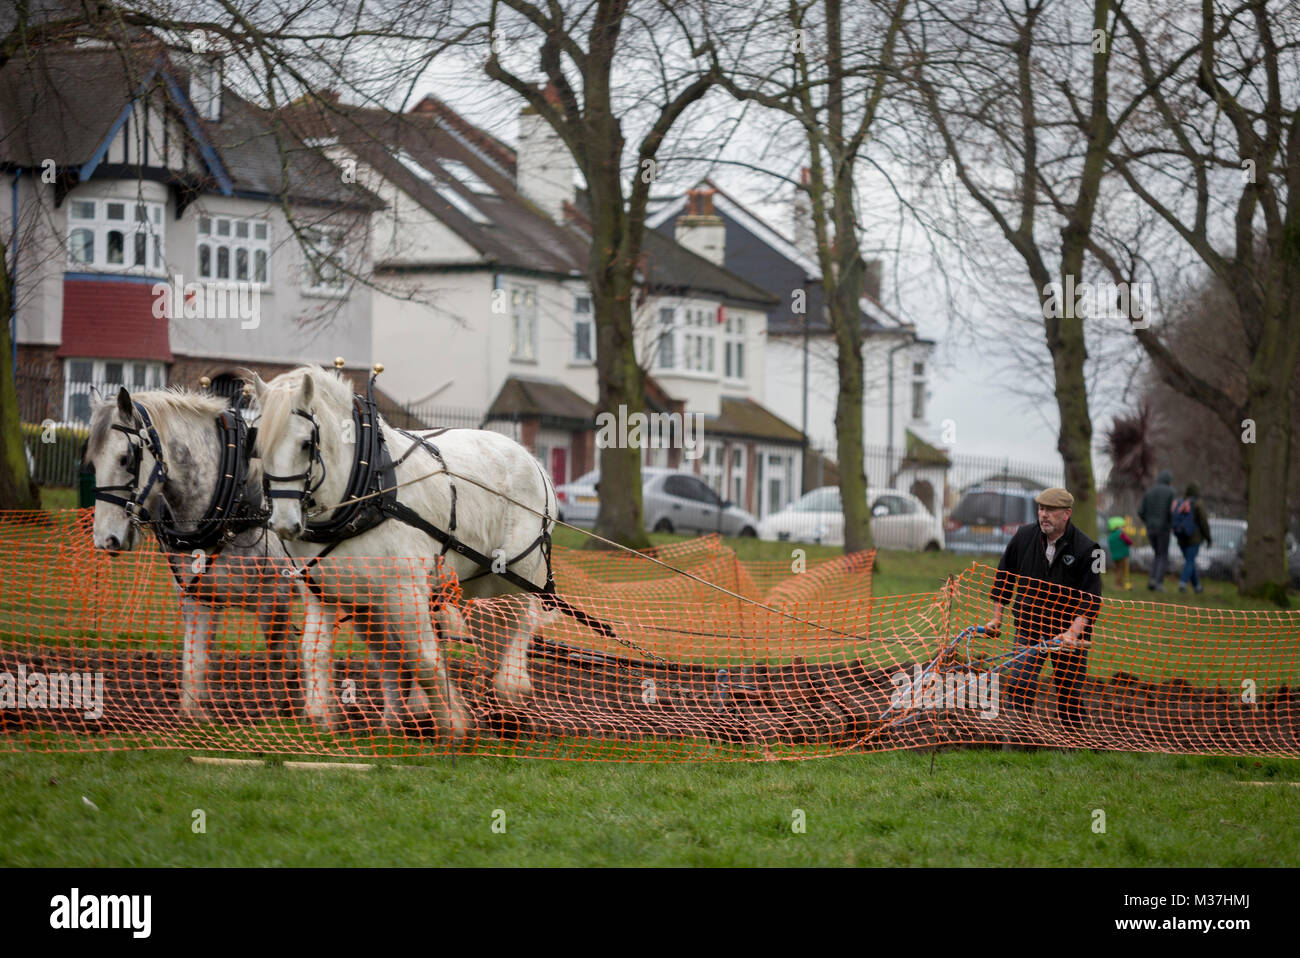 Irish ploughman Tom Nixon leads Shire horses Nobby and Heath as they plough an on-going heritage wheat-growing area in Ruskin Park, a public green space in the borough of Southwark, on 9th February 2018, in London, England. The Friends of Ruskin Park are again growing heritage wheat and crops together with the Friends of Brixton Windmill and Brockwell Bake Association. Shire horses are descended from the medieval warhorse but are a breed under threat. Operation Centaur, which maintains the last working herd of Shires in London is dedicated to the protection and survival of the breed. Stock Photo